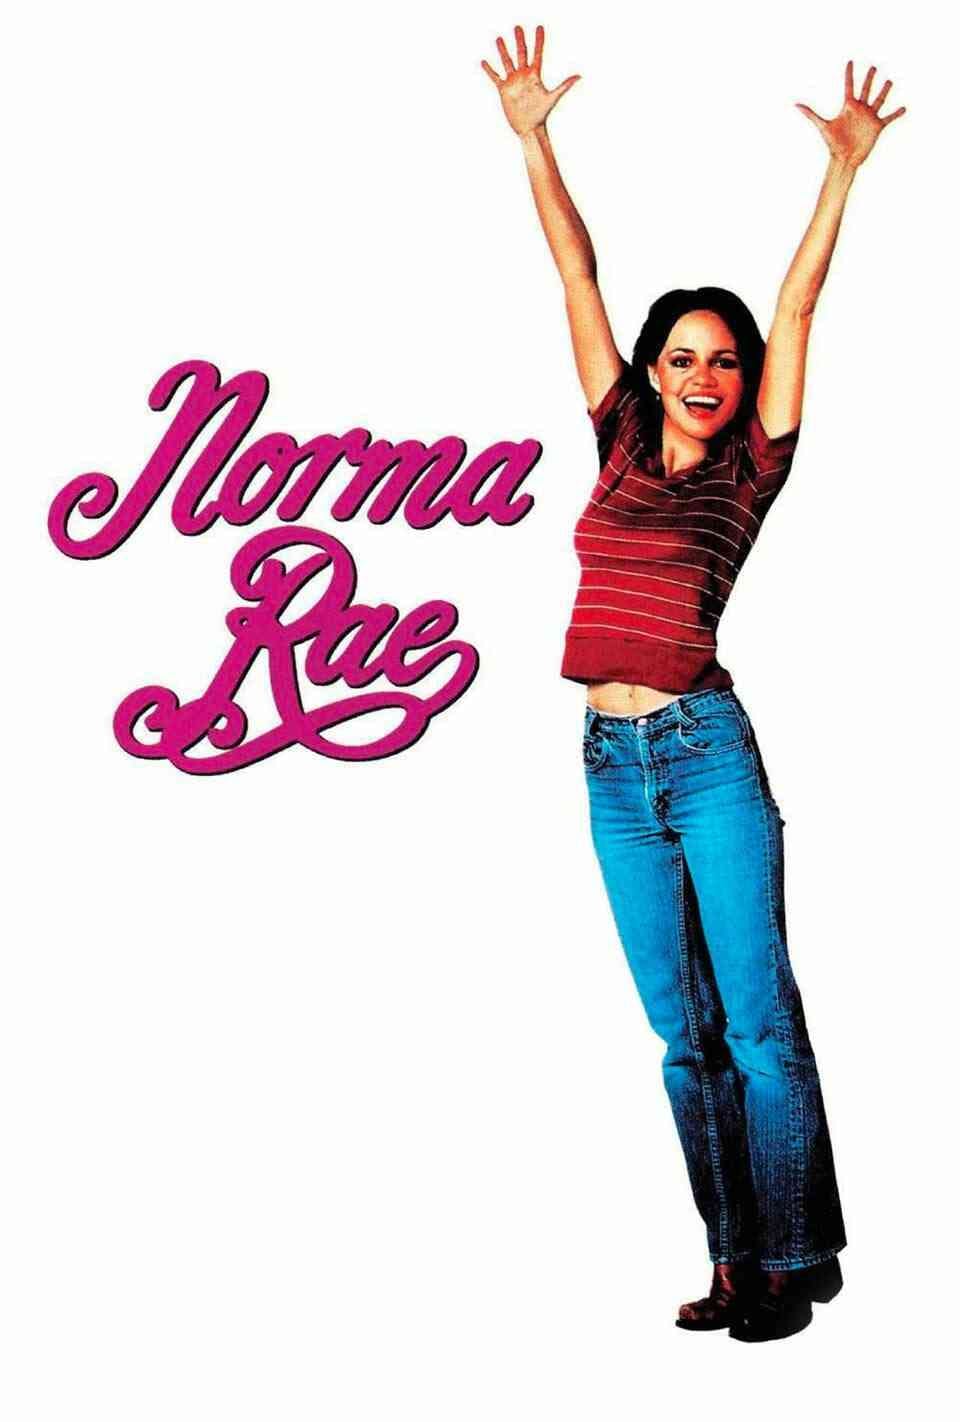 Read Norma Rae screenplay (poster)